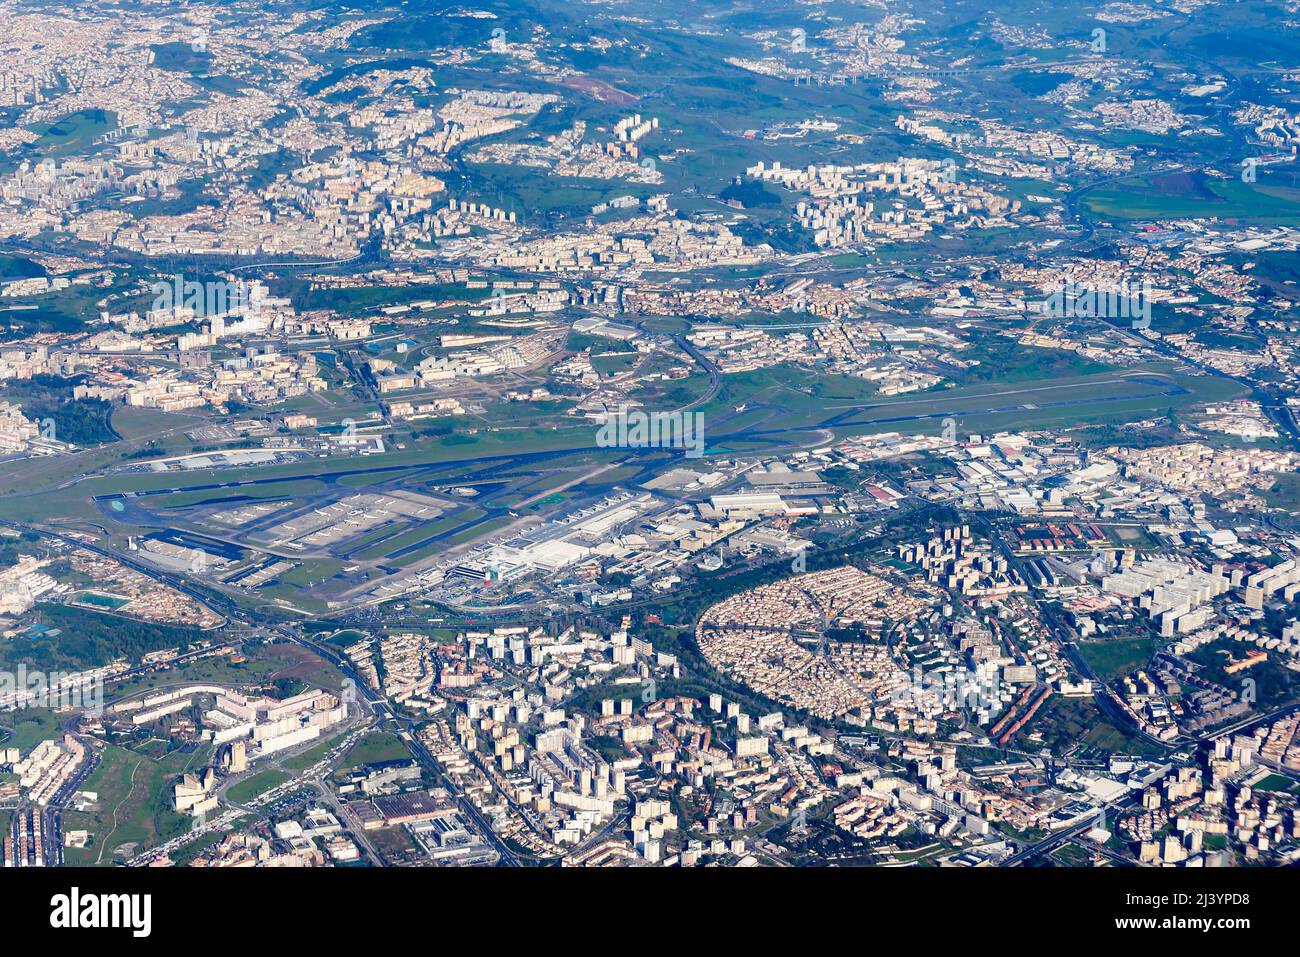 Lisbon Airport aerial view. Portela Airport located in Lisbon, Portugal. Airport used be TAP as its hub. Overview of Lisbon Humberto Delgado Airport. Stock Photo